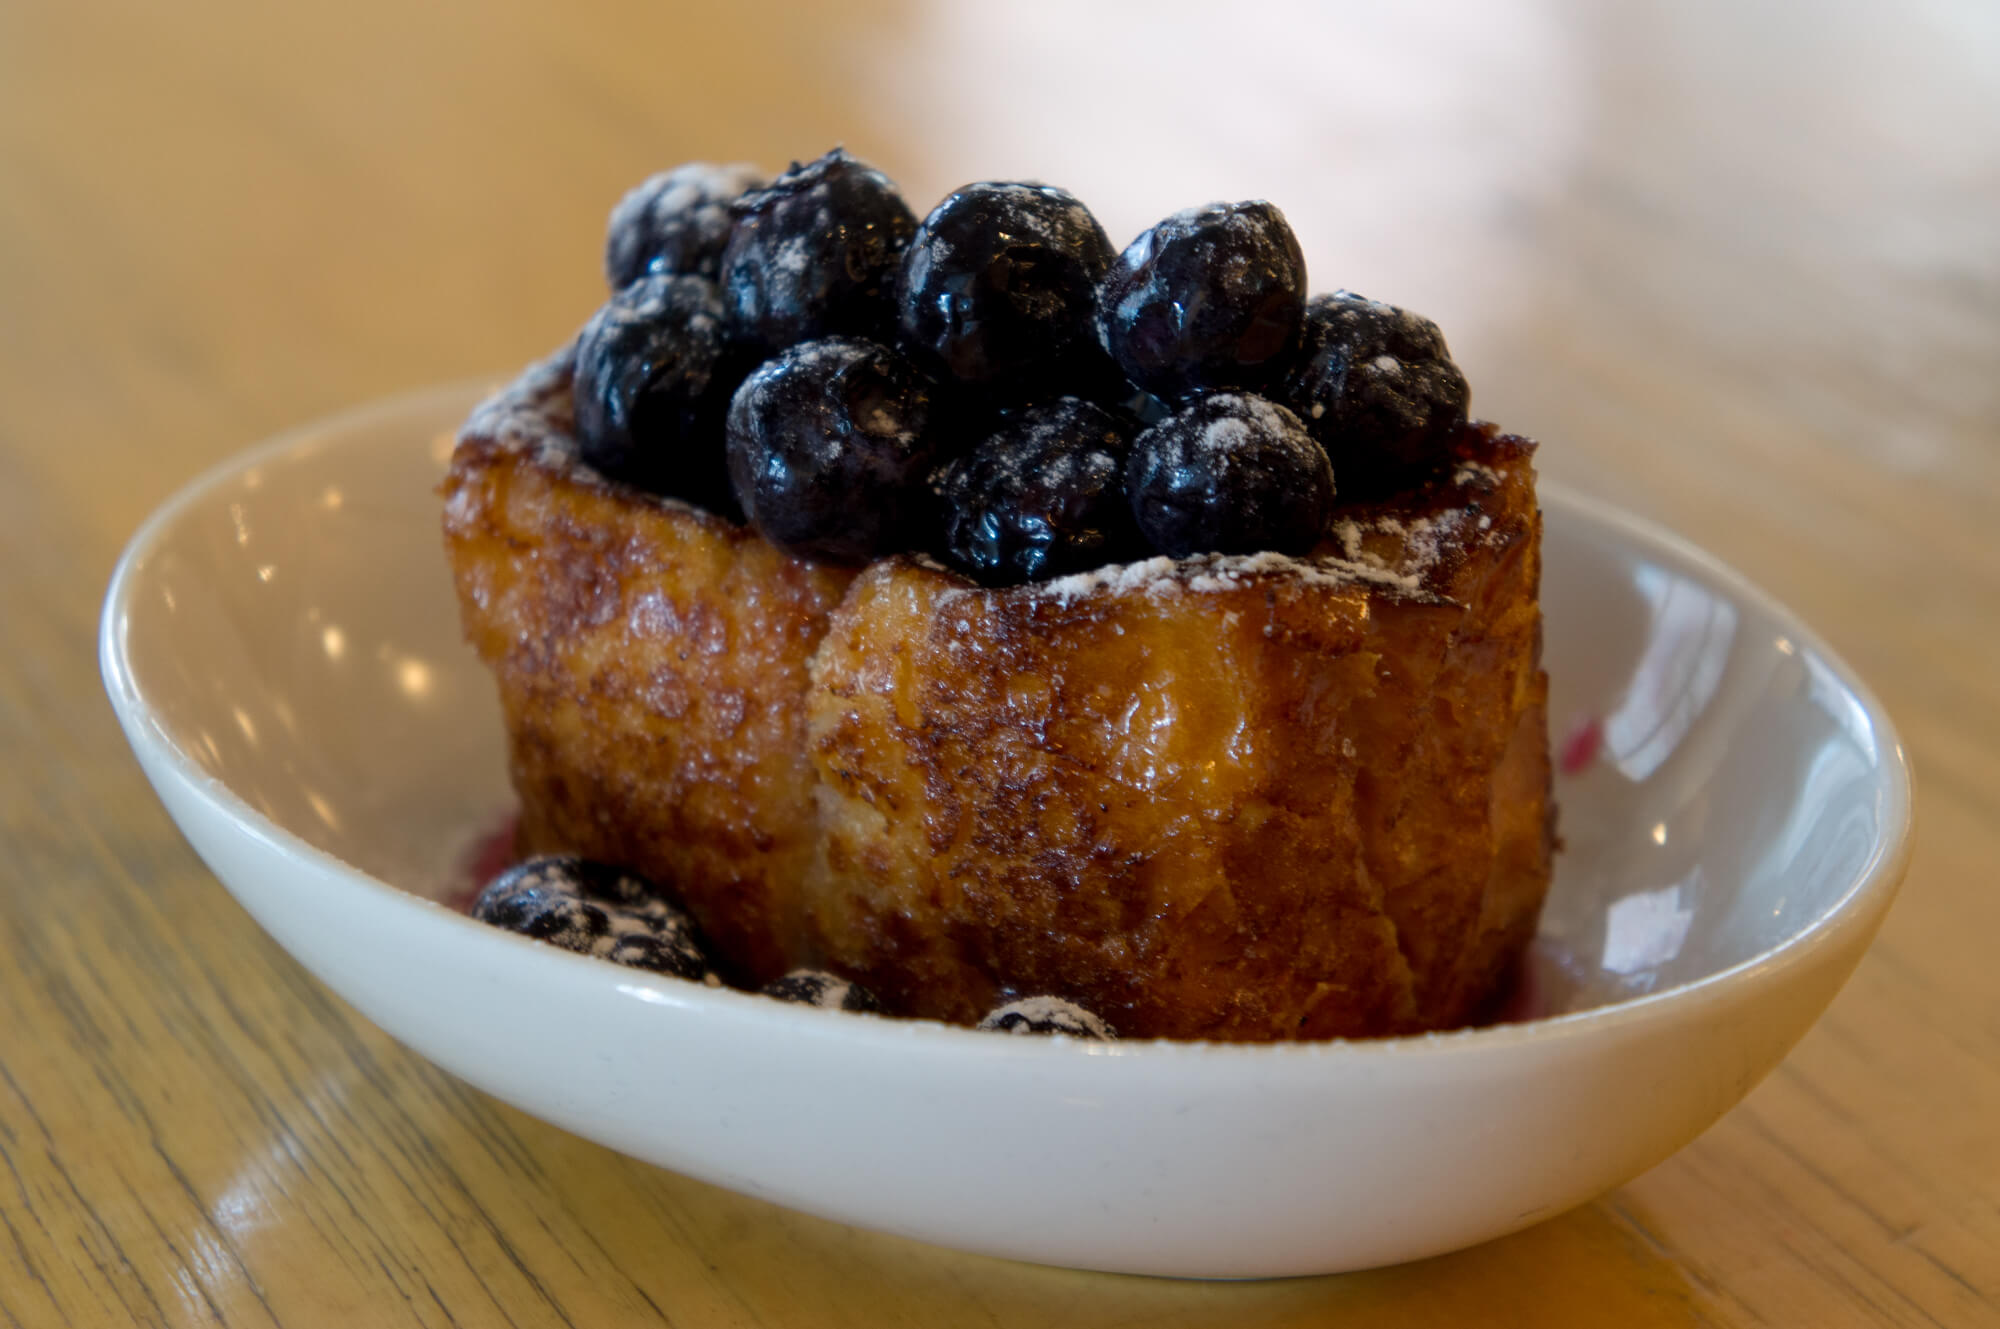 Sugared Blueberry Kiosque French Toast